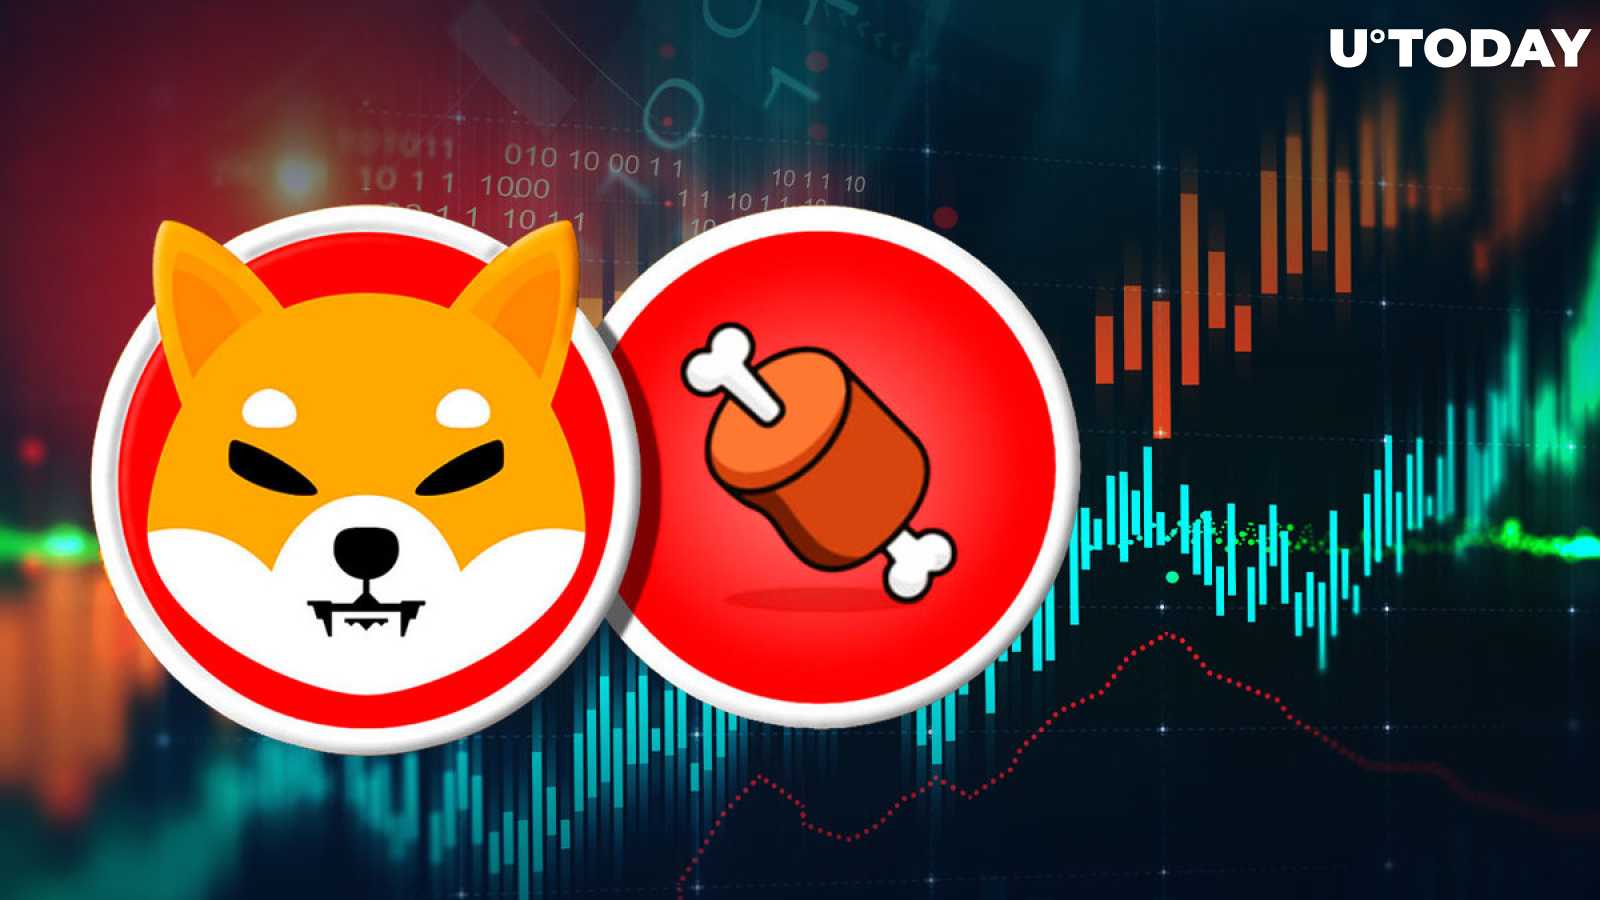 Shiba Inu's BONE Sees 205% Rise in Volume as Price Tumbles, What's Happening?